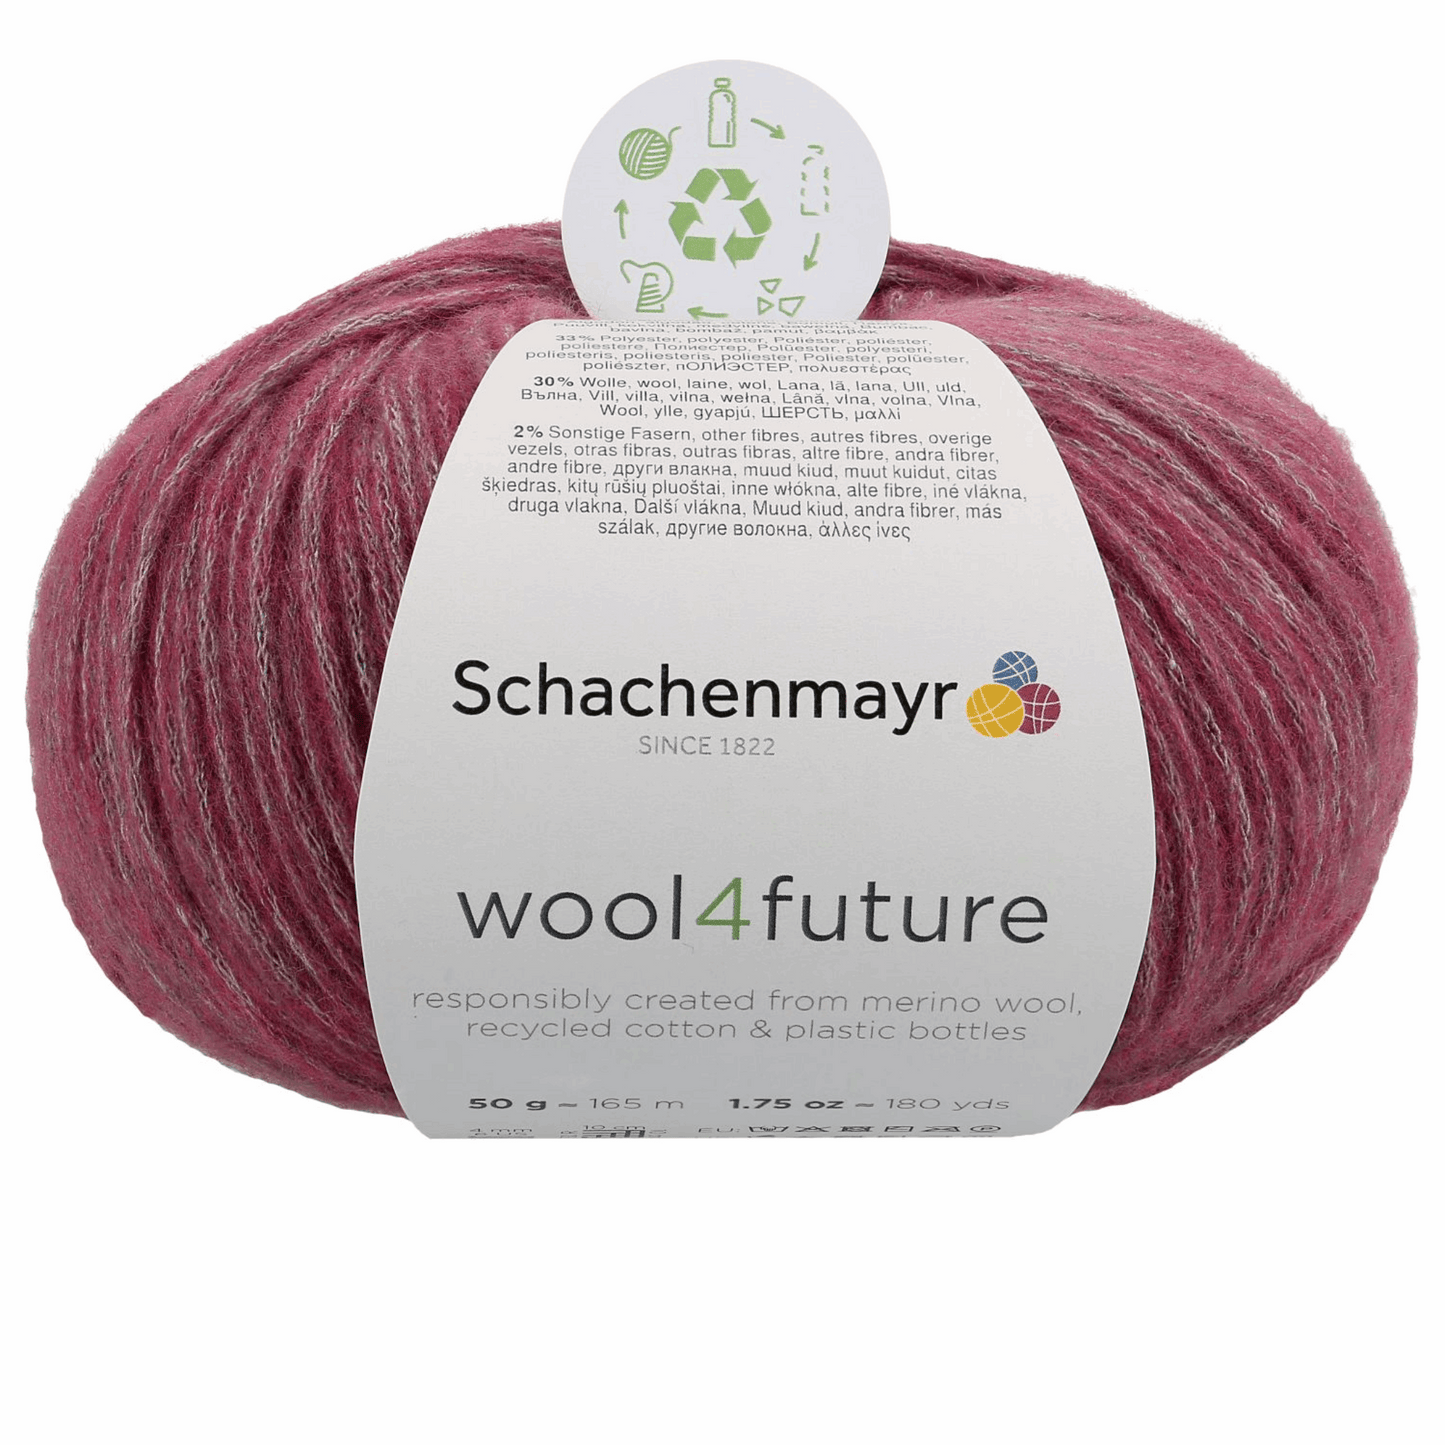 Schachenmayr Wool 4 Future 50g, 90594, color mulberry 45